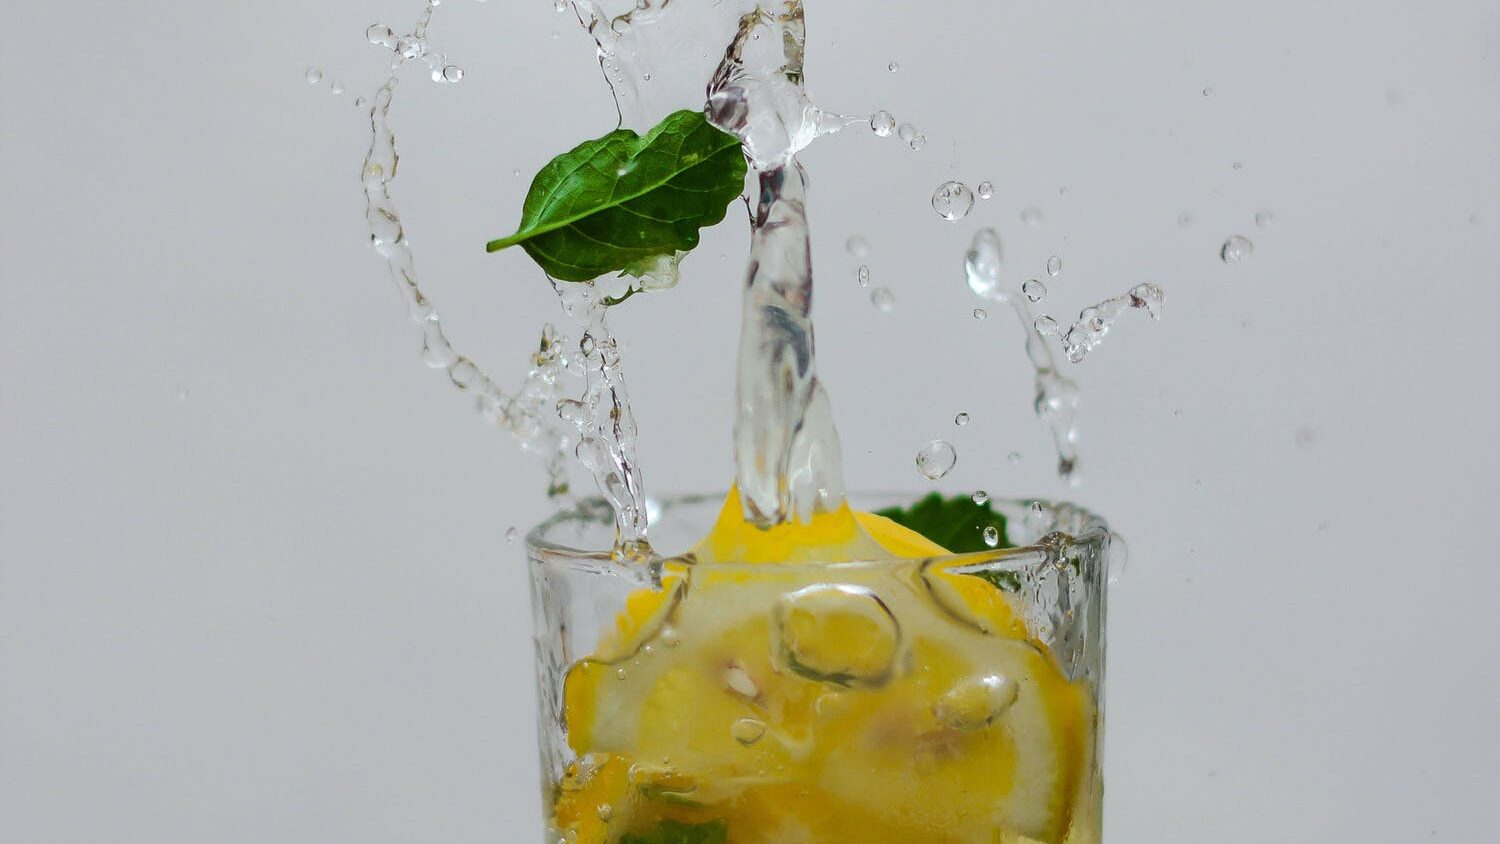 Glass of lemon water prepared by adding slices of lemon into plain water.